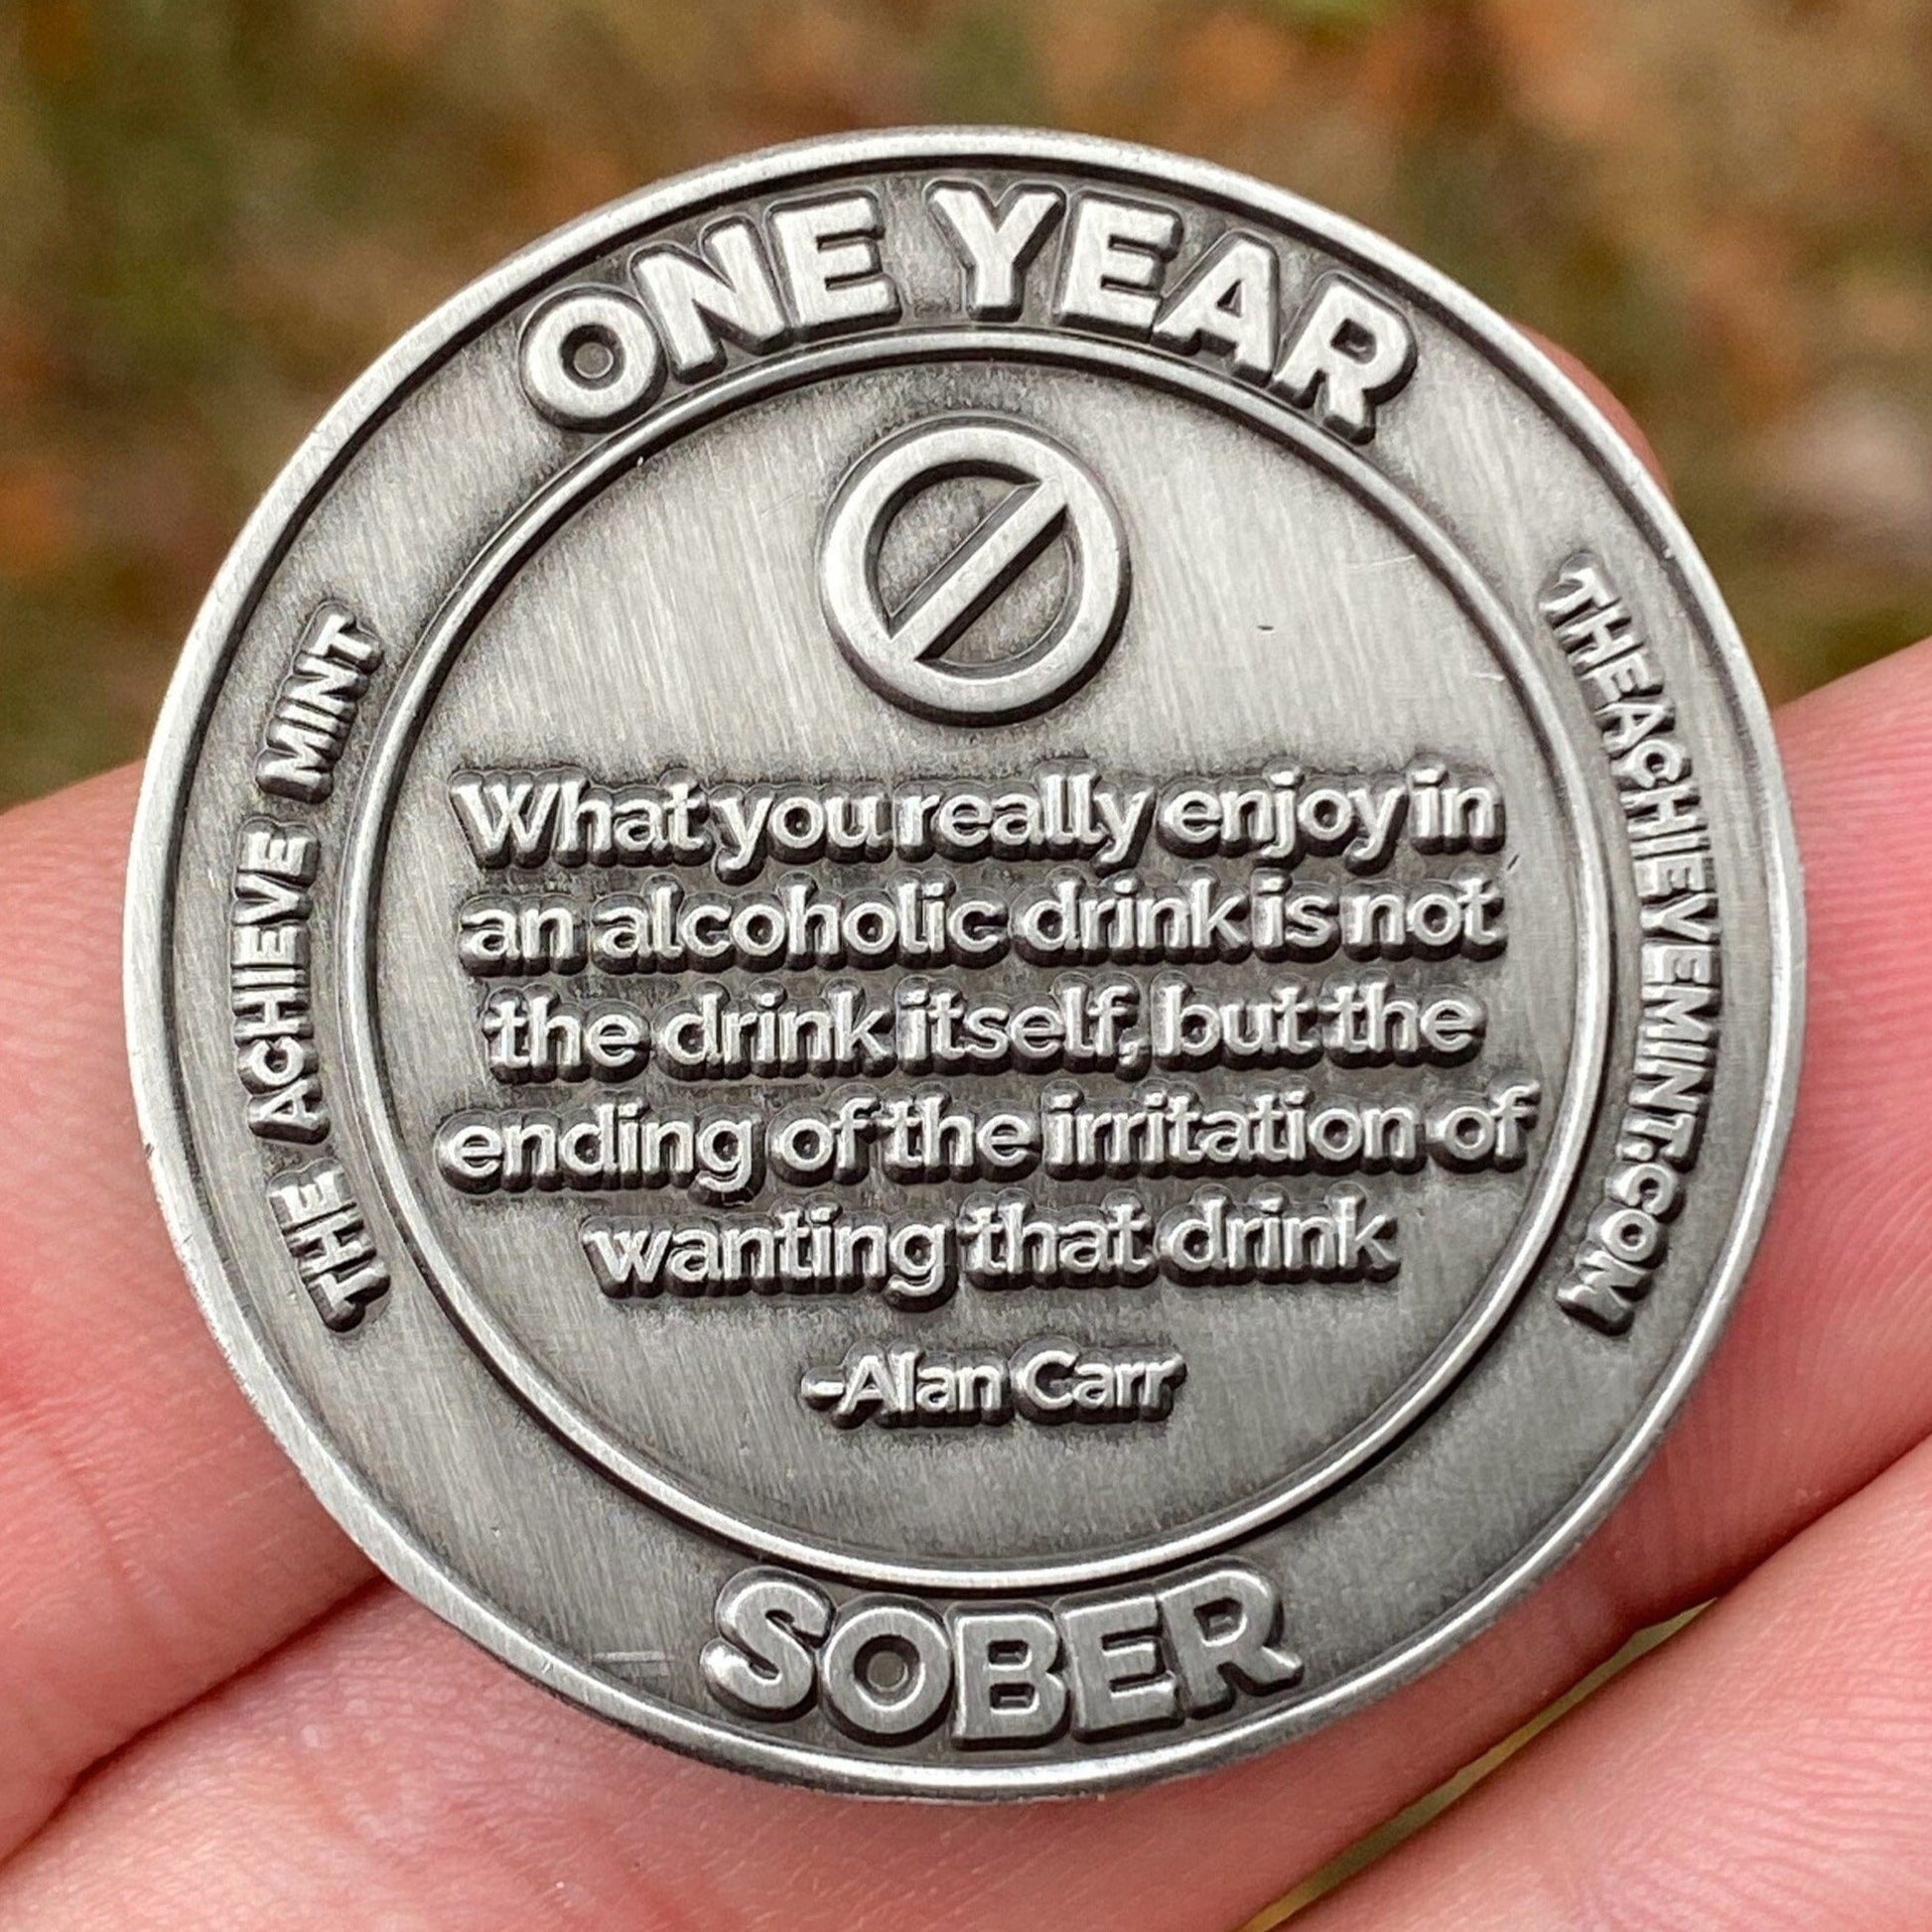 One Year Sober Emoji sobriety coin - The Achieve Mint